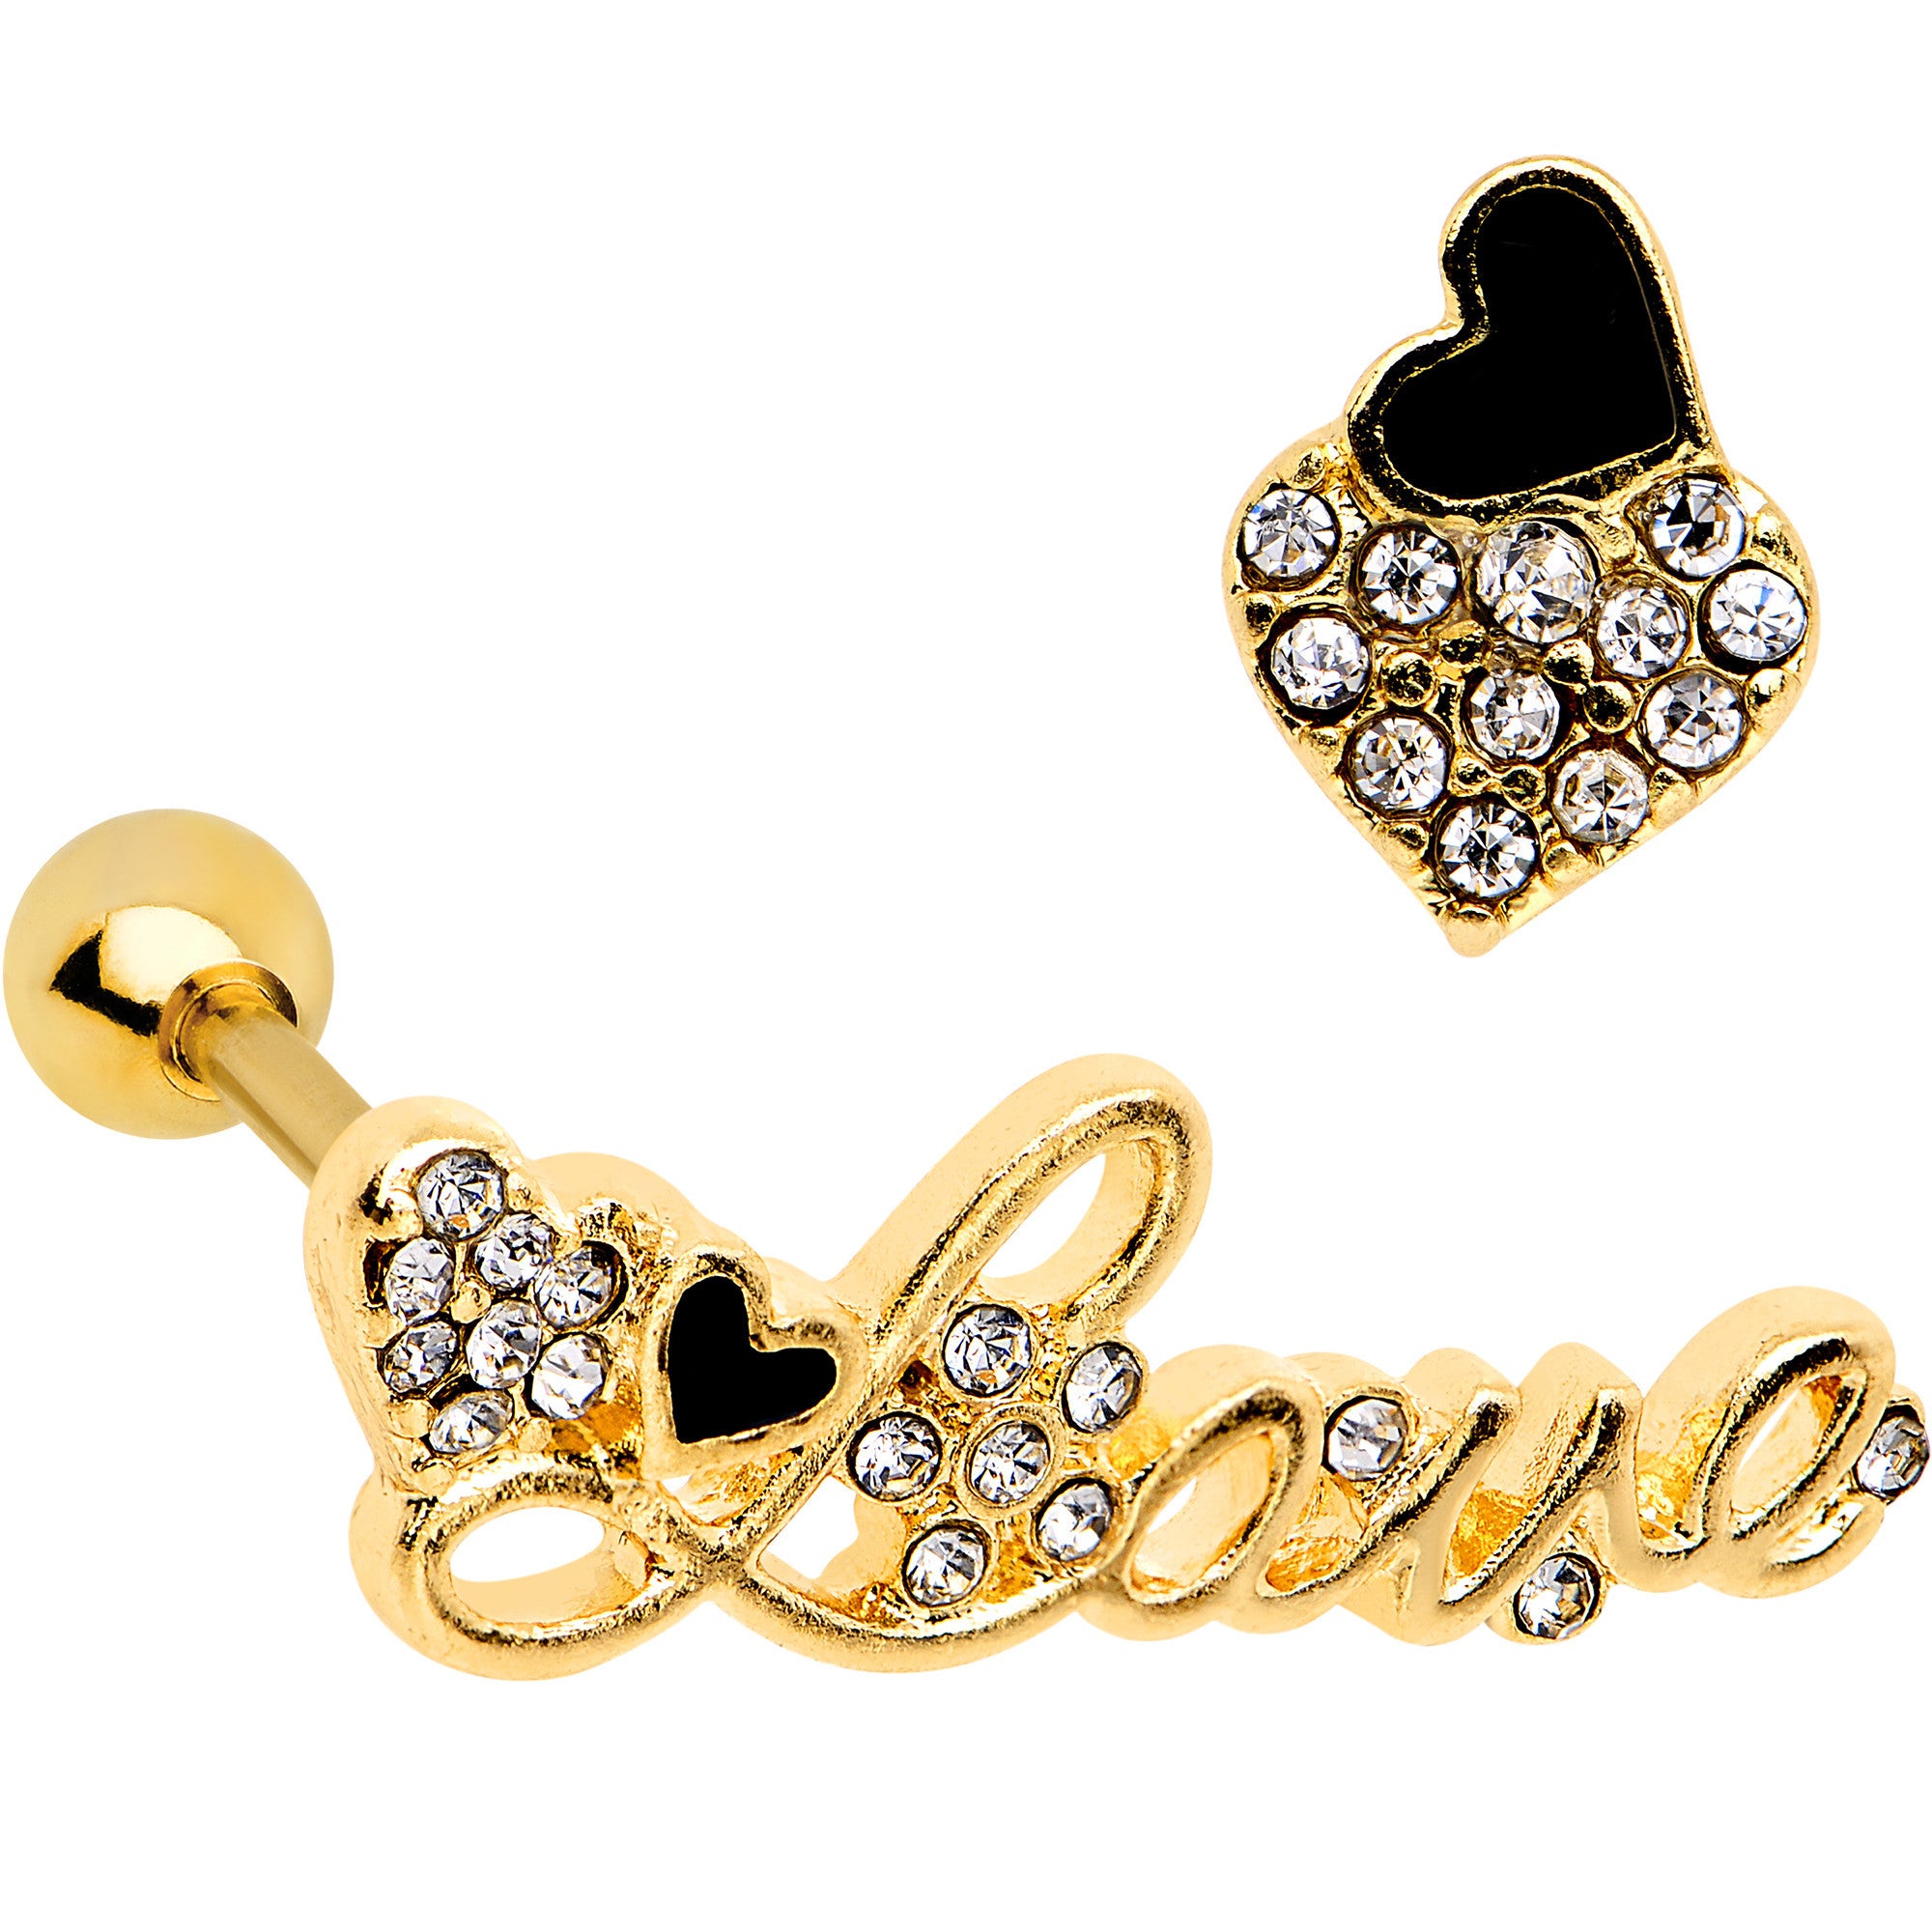 1/4 Gold Tone Love and Hearts Cartilage Tragus Earring Set